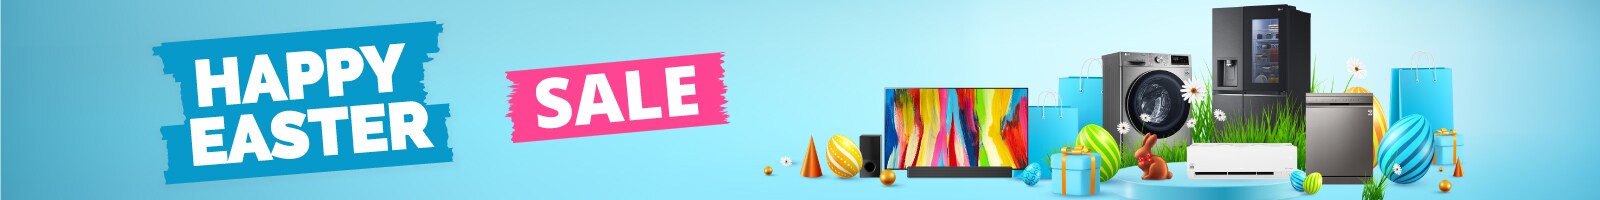 %5BEF%5D_Easter_Sale_1600x200